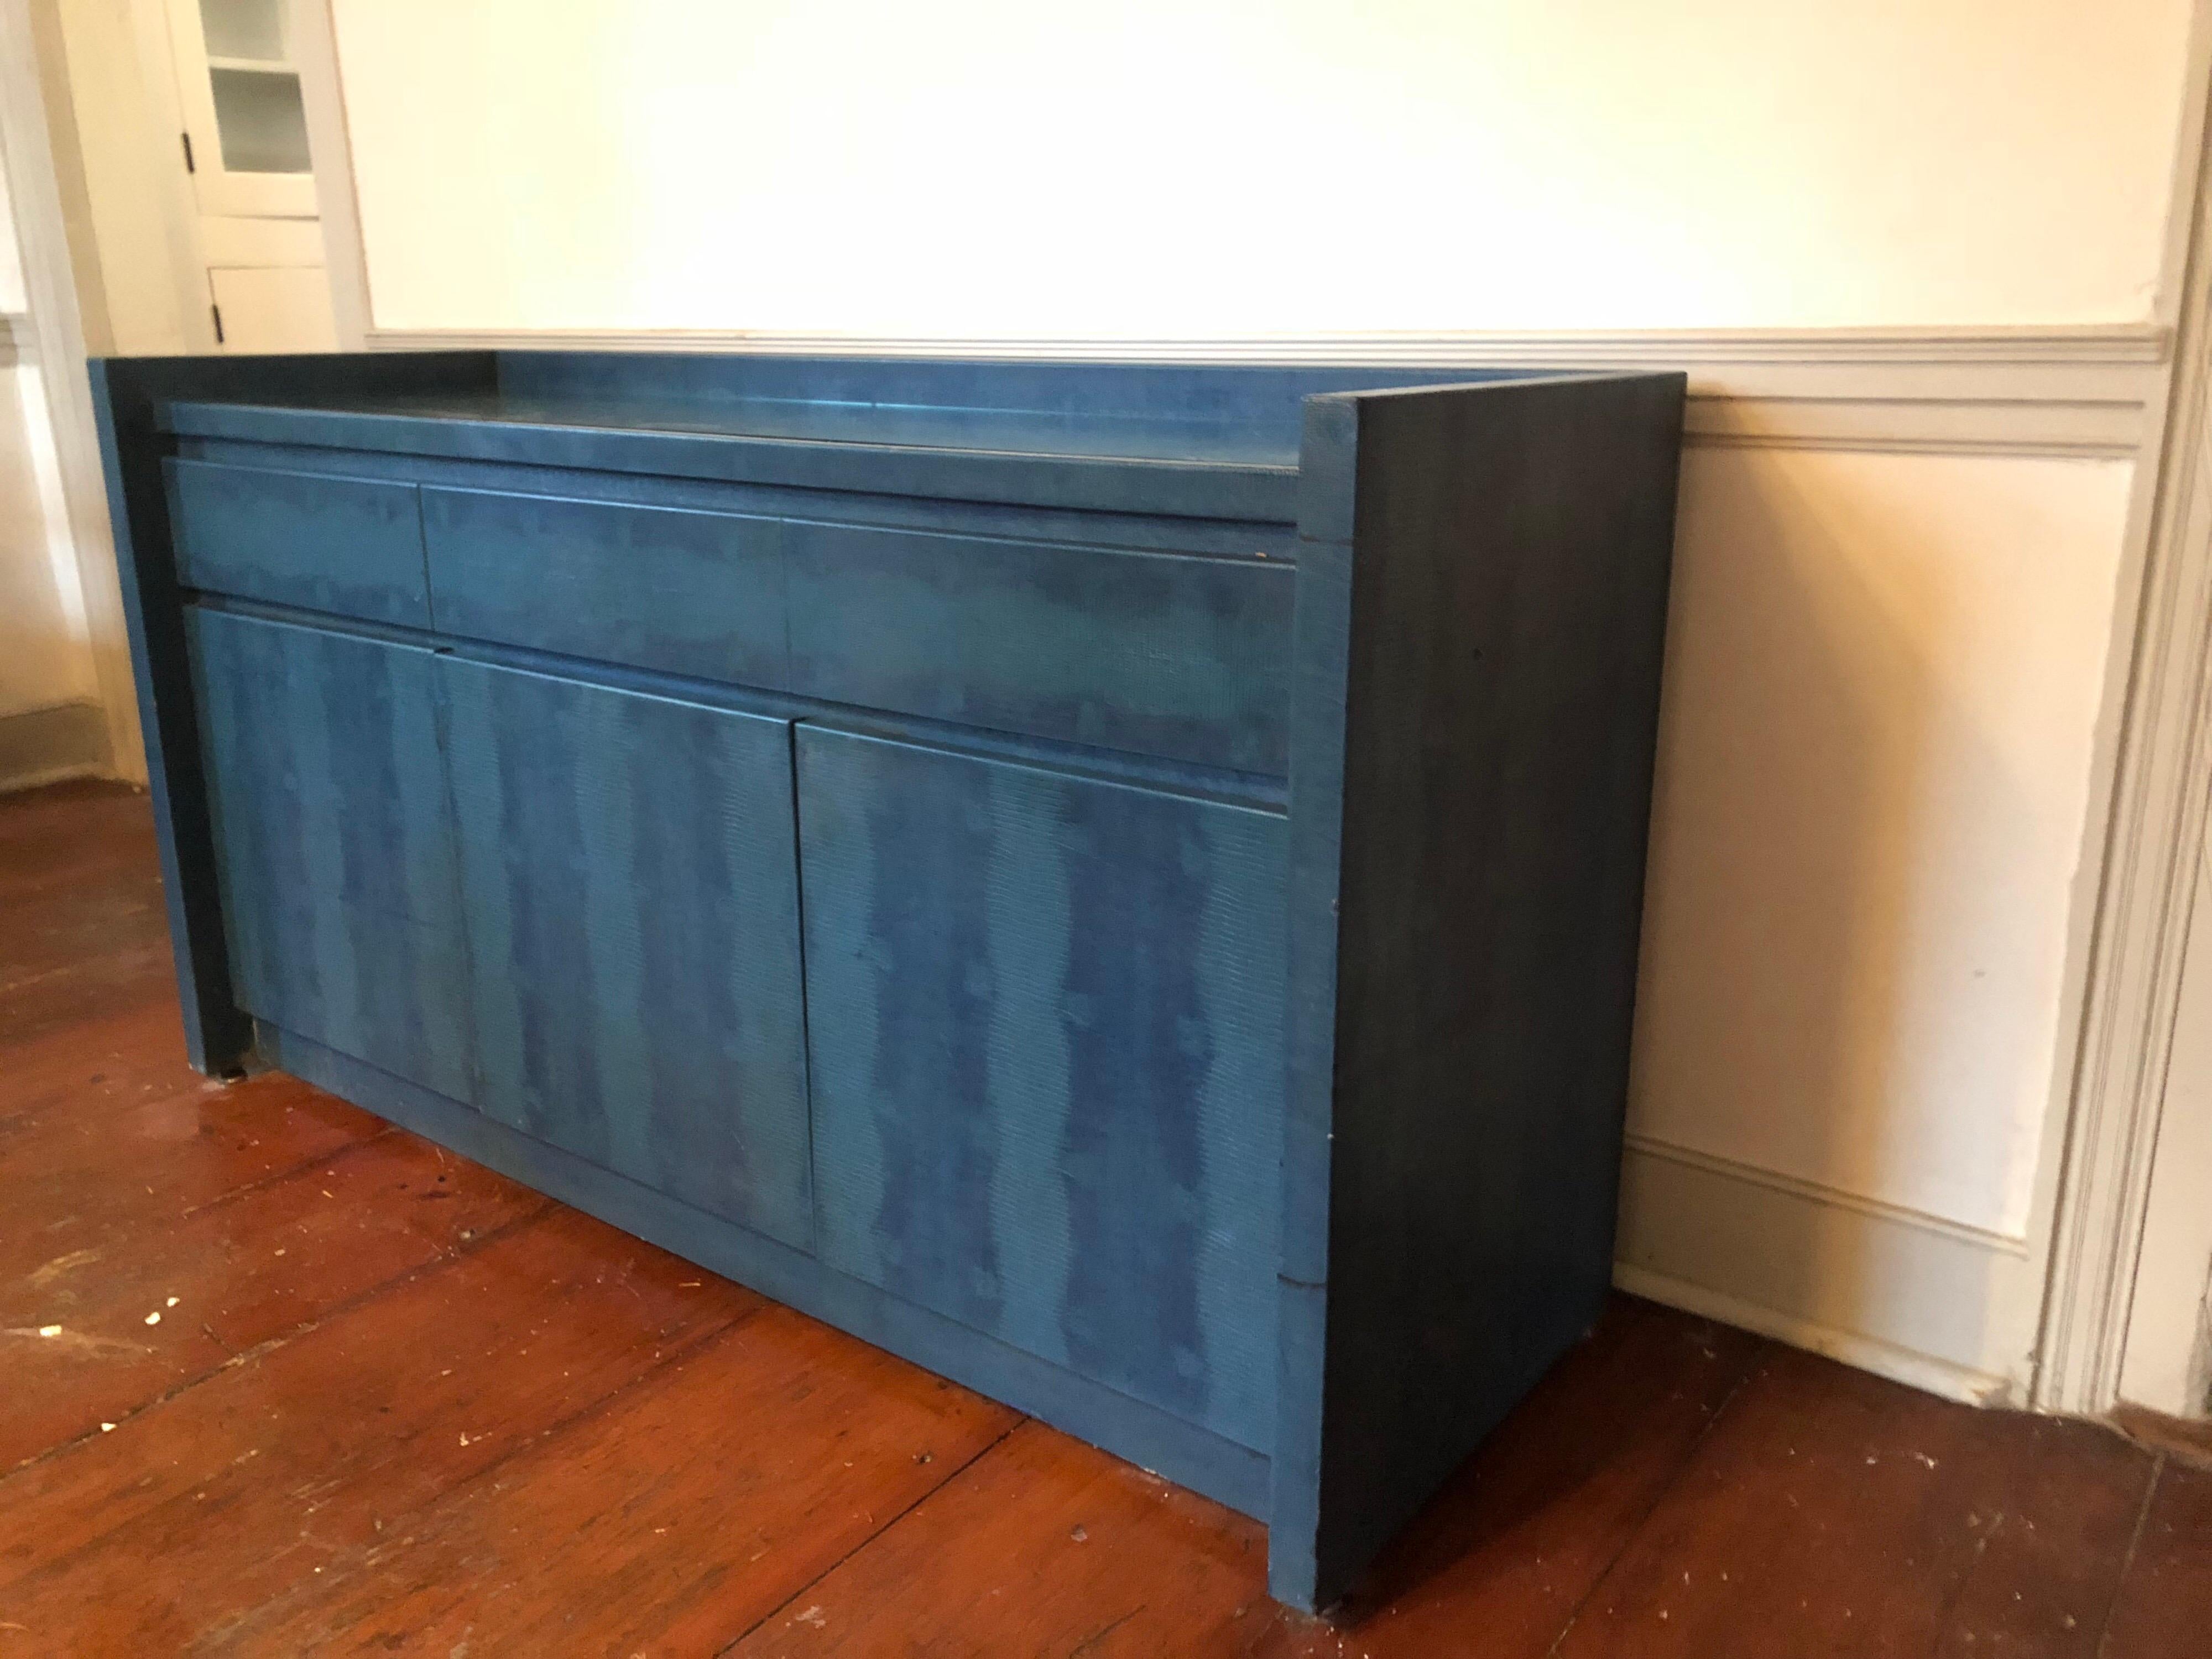 A embossed leather sideboard in a deep teal blue. Wonderful Parsons style with structured lines. Complete with fitted glass top. Three upper felt lined drawers and lower drawers with shelves.